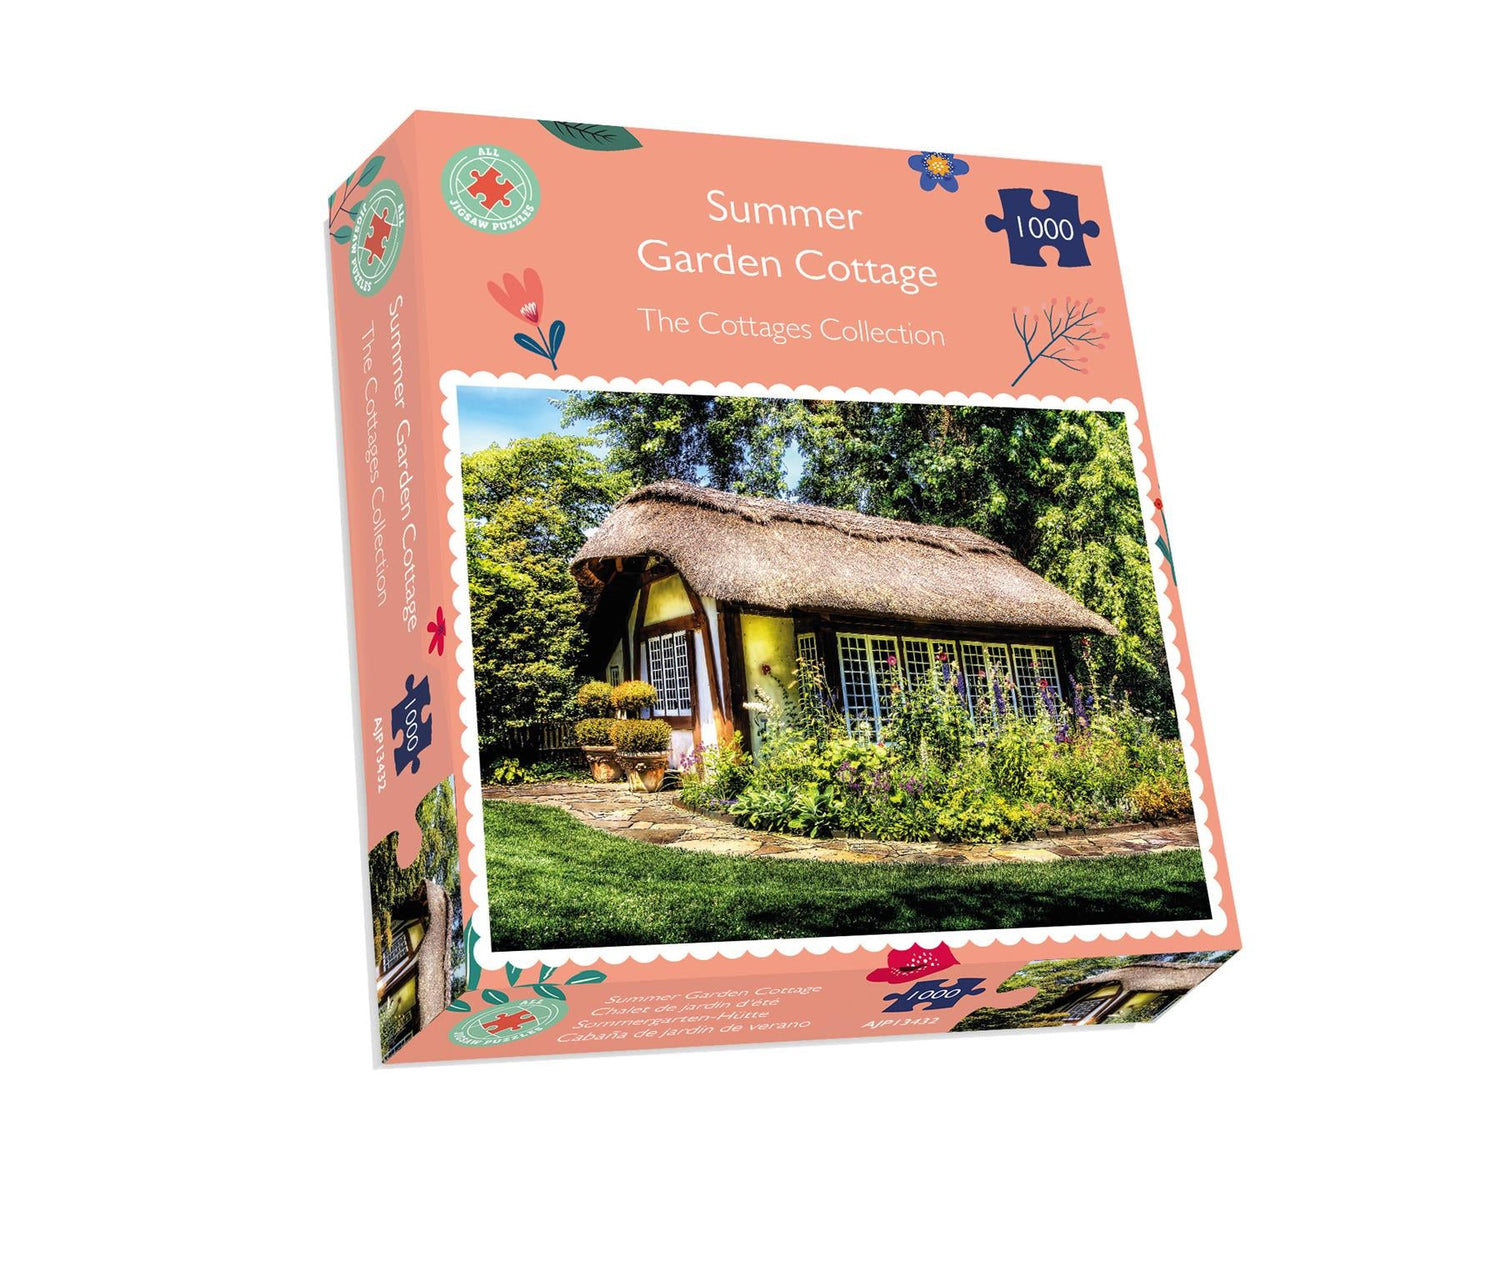 Mother's Day Jigsaw Puzzles